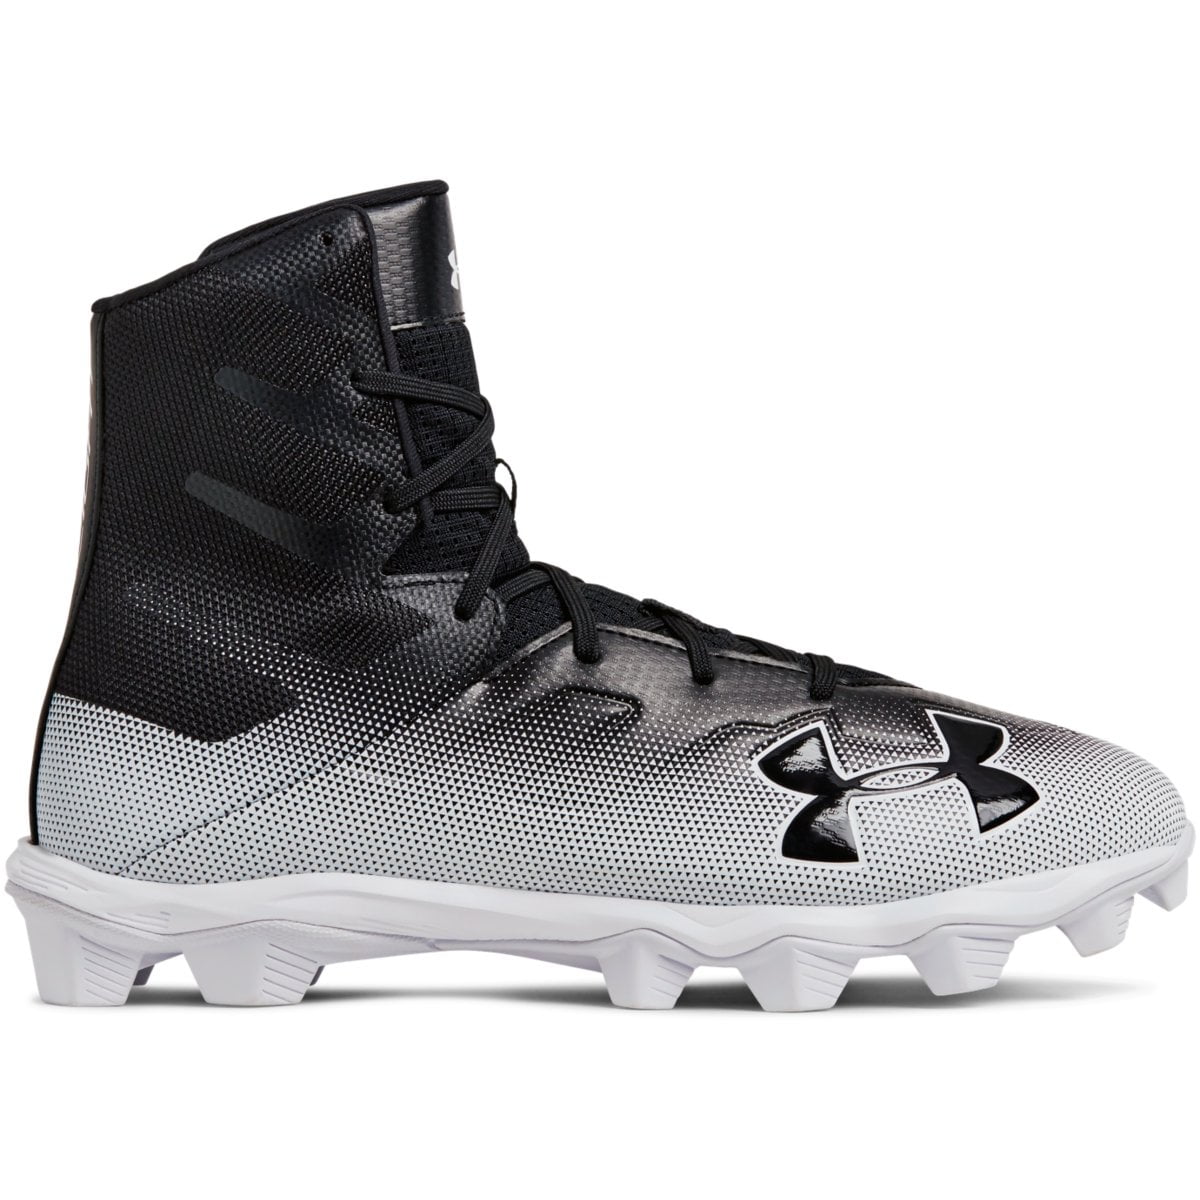 New Mens Under Armour Highlight RM Lacrosse/Football Cleats Black/White Sz 7.5 M 